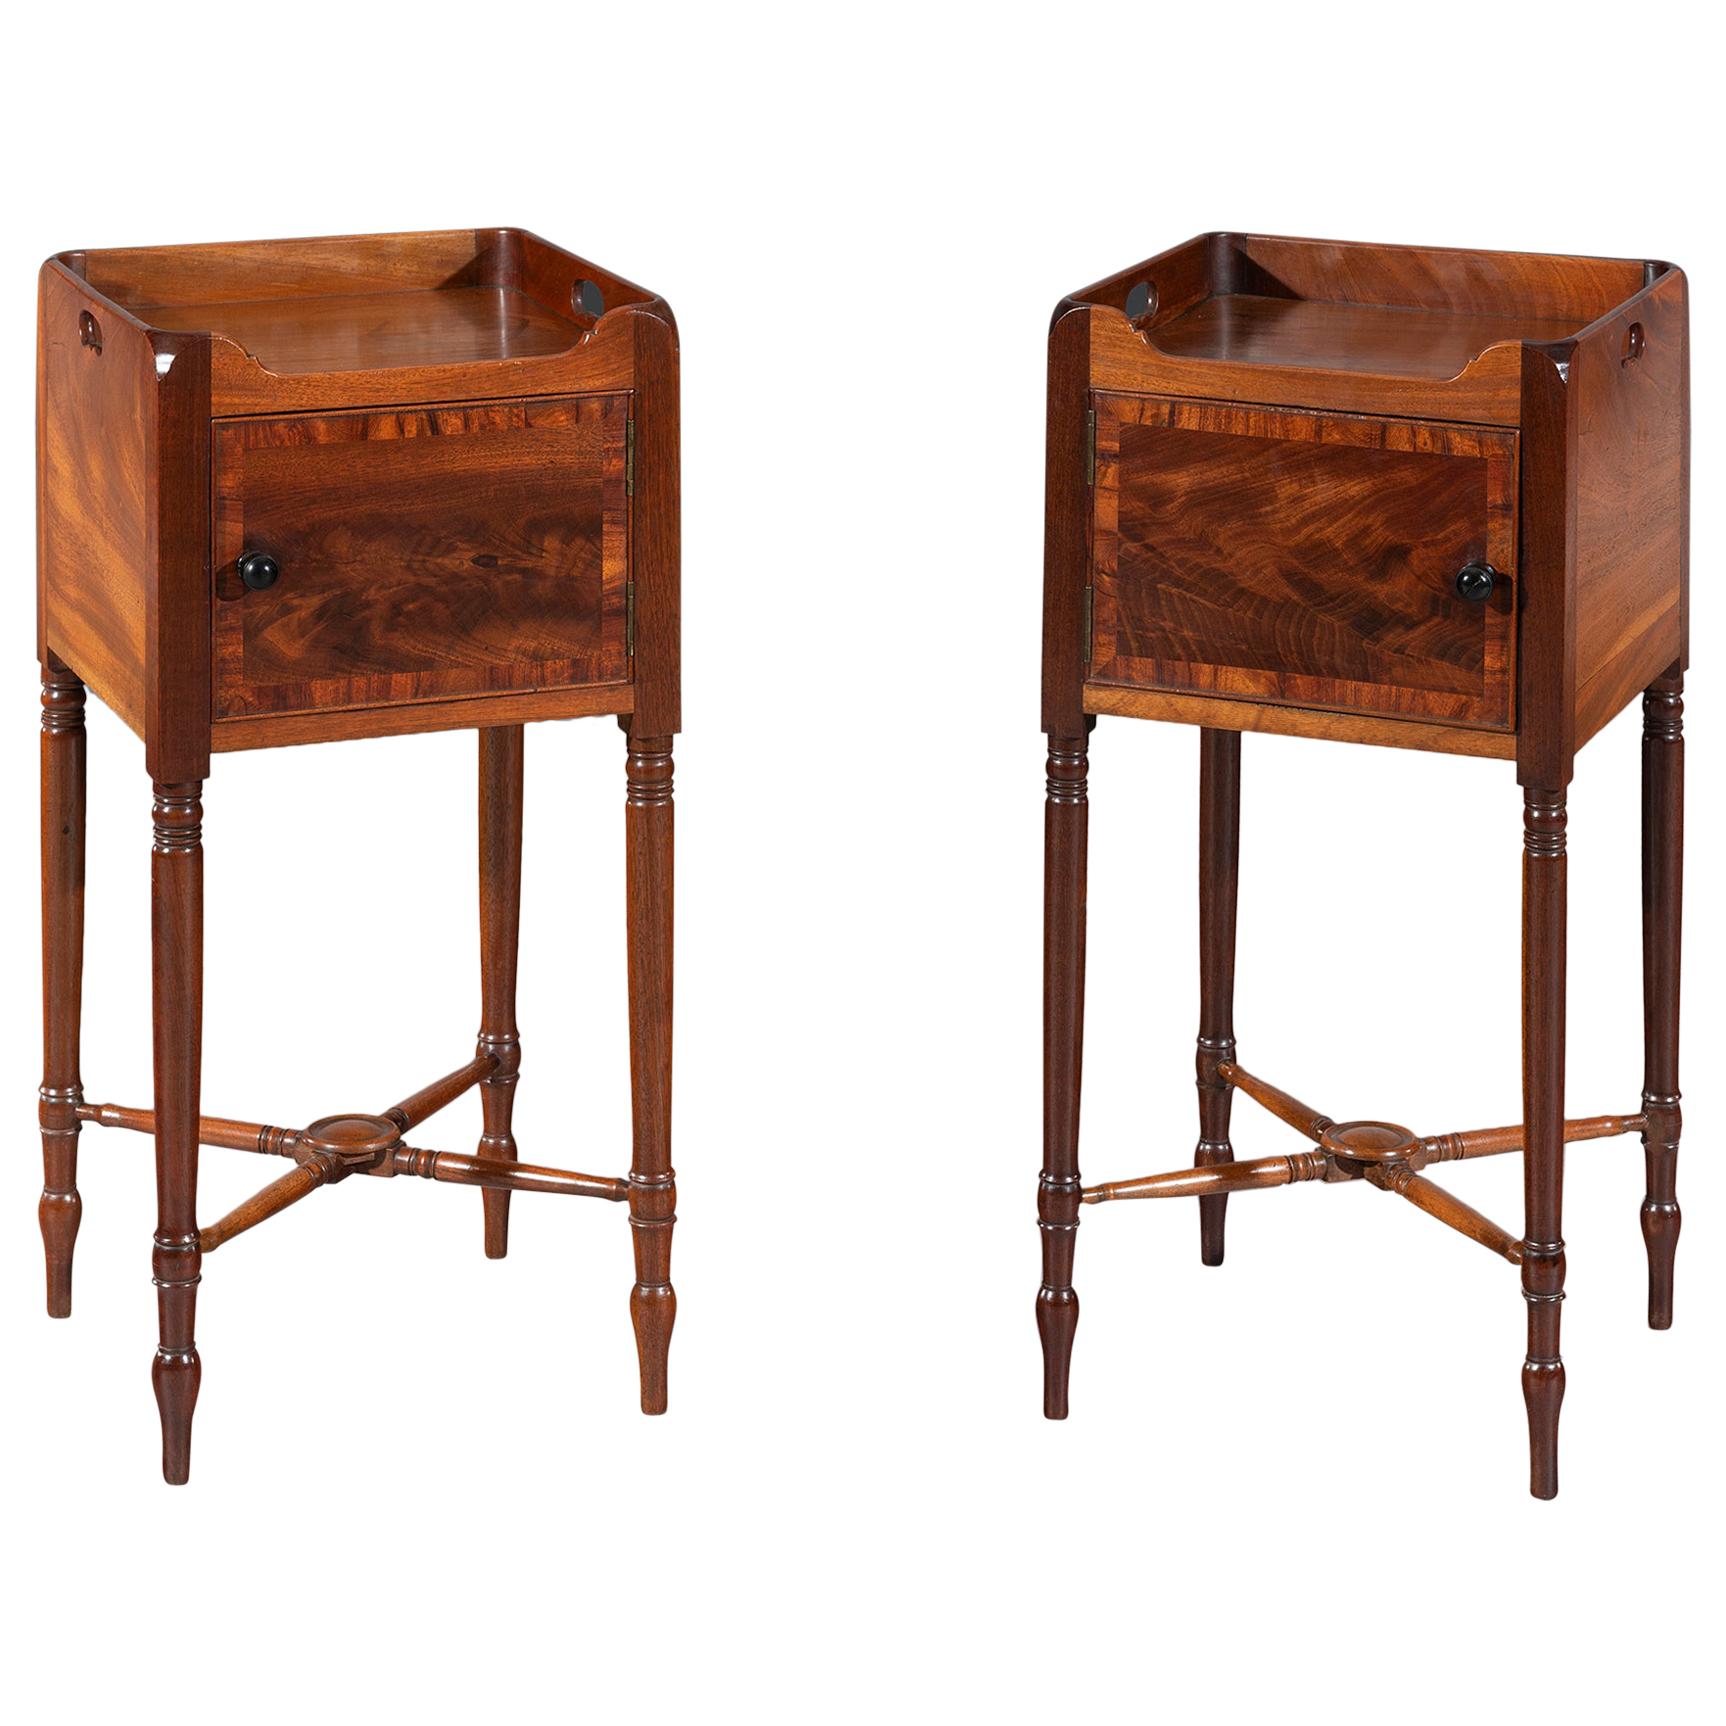 Rare Pair of George III Flamed Mahogany and Ebony Bedside Cabinets